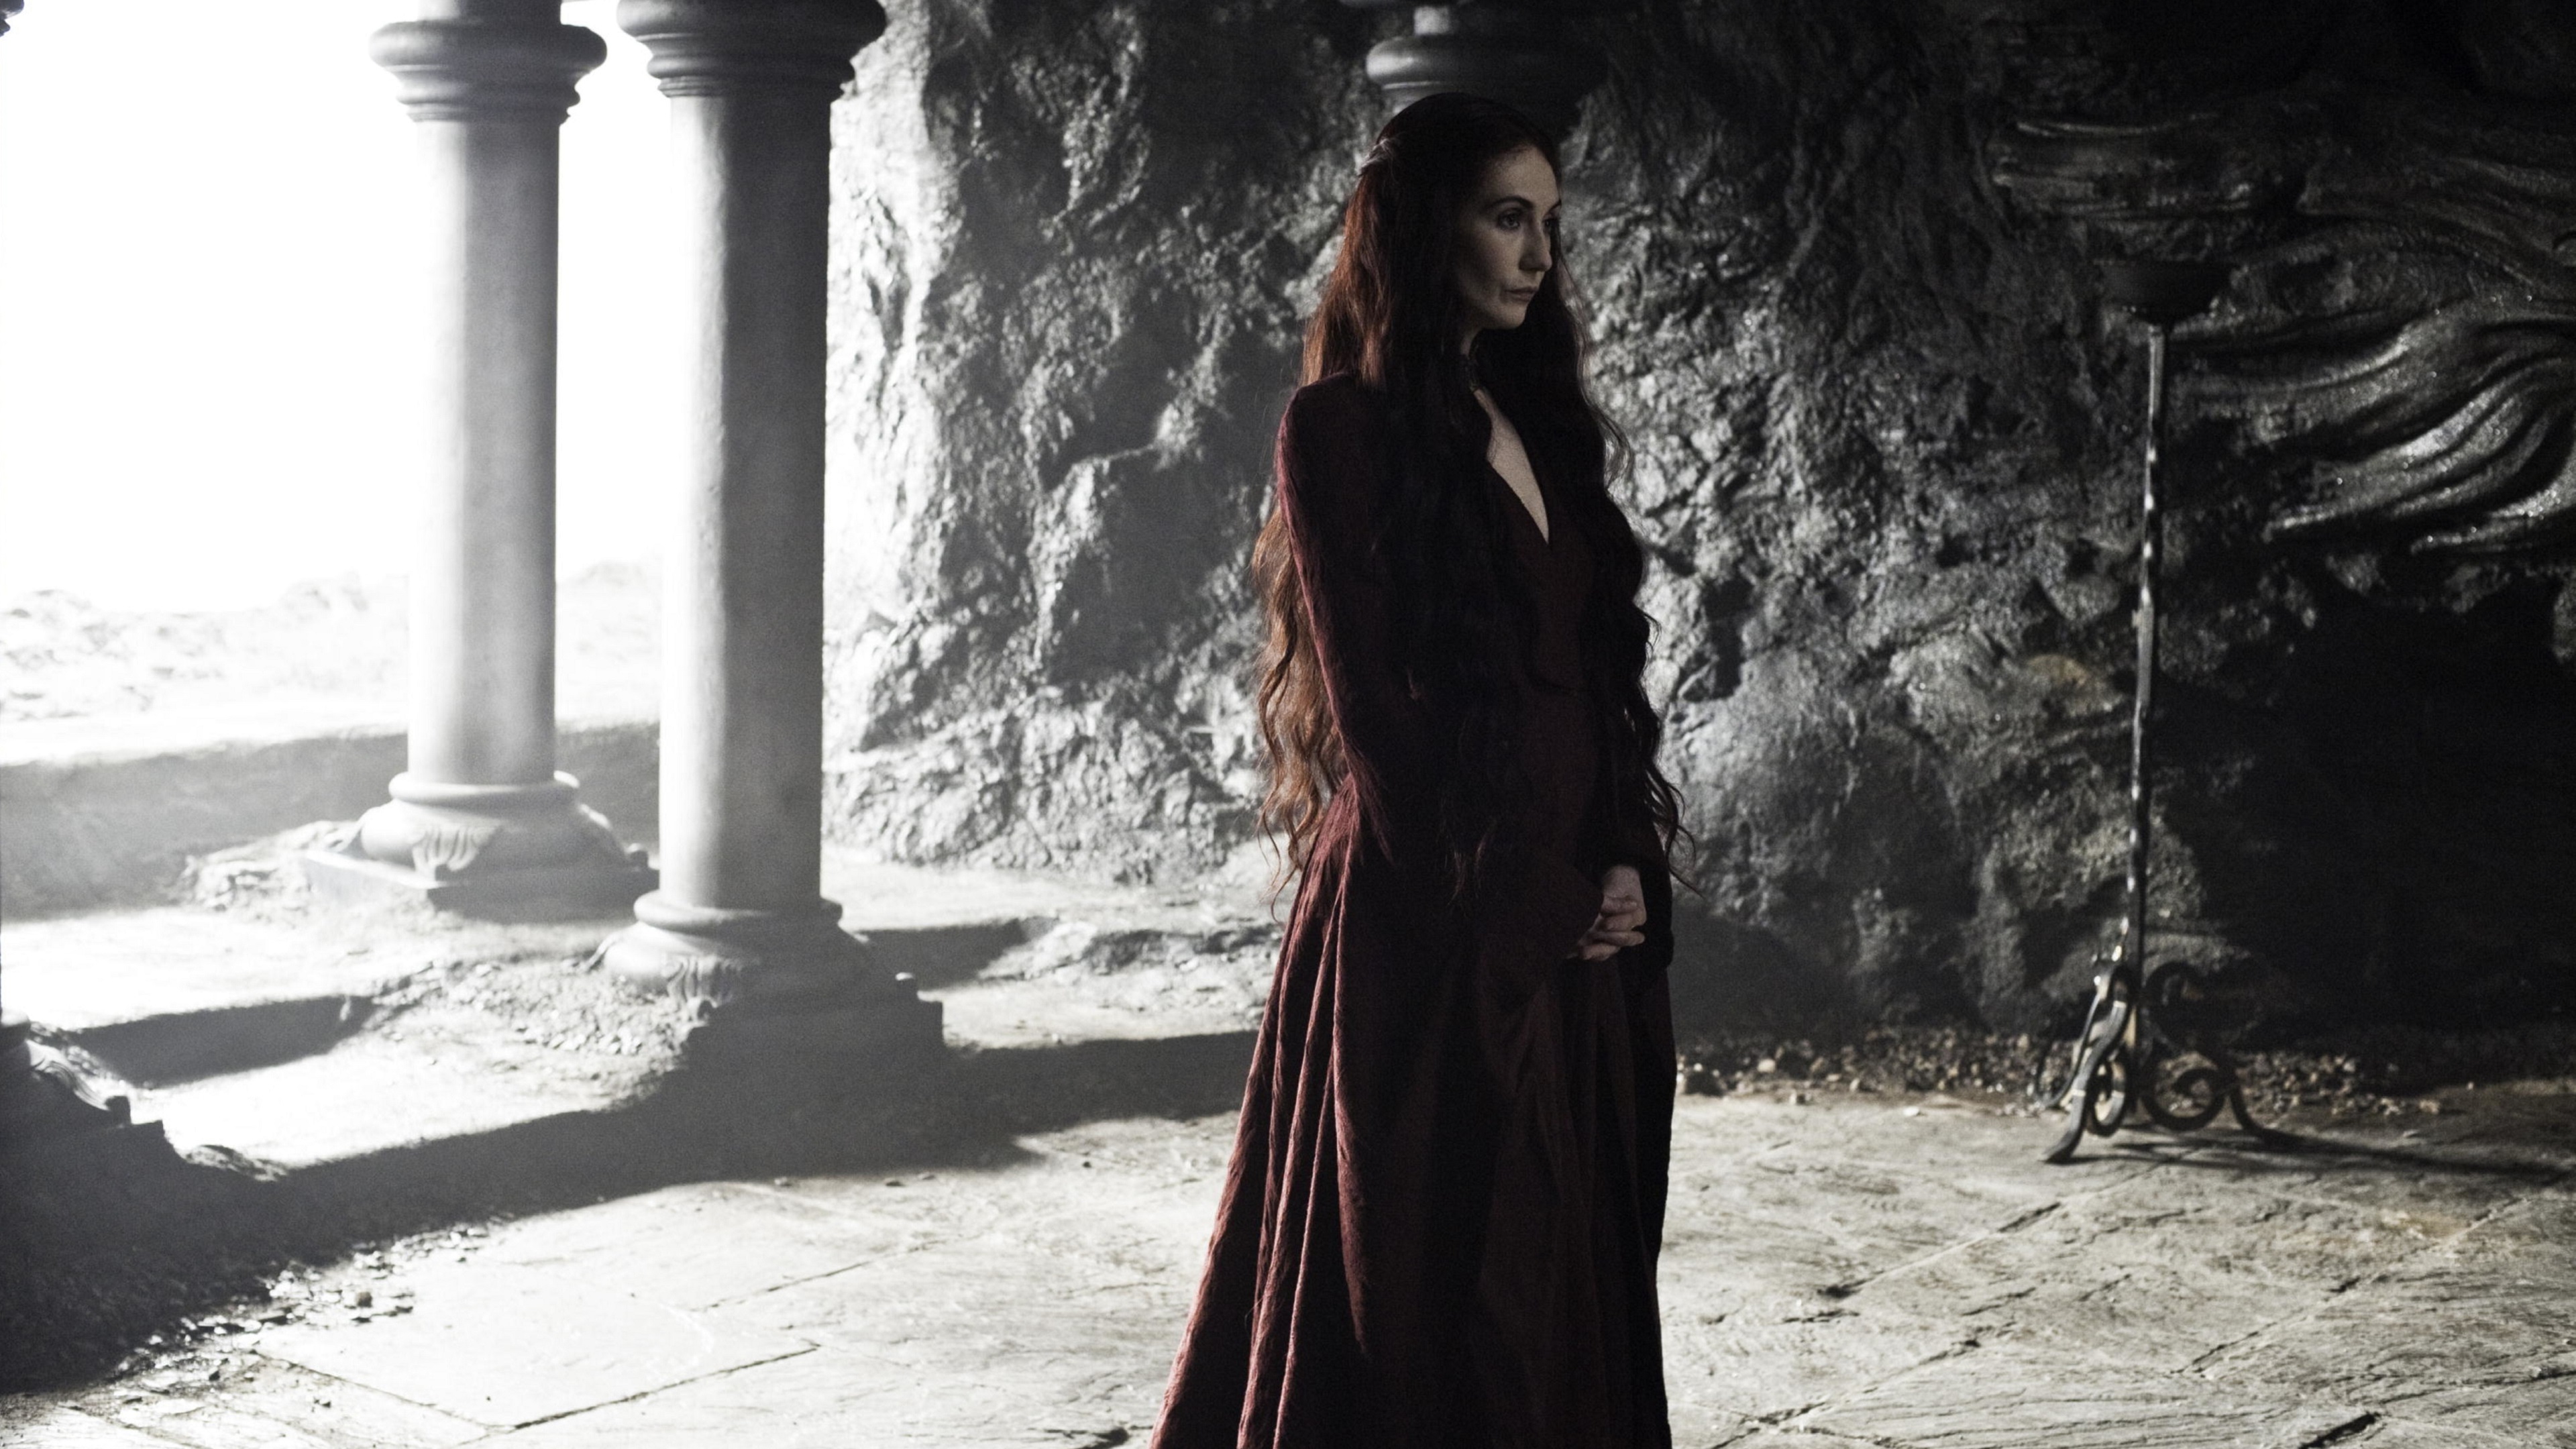 game of thrones wallpaper 4k,photograph,beauty,fashion,long hair,black and white